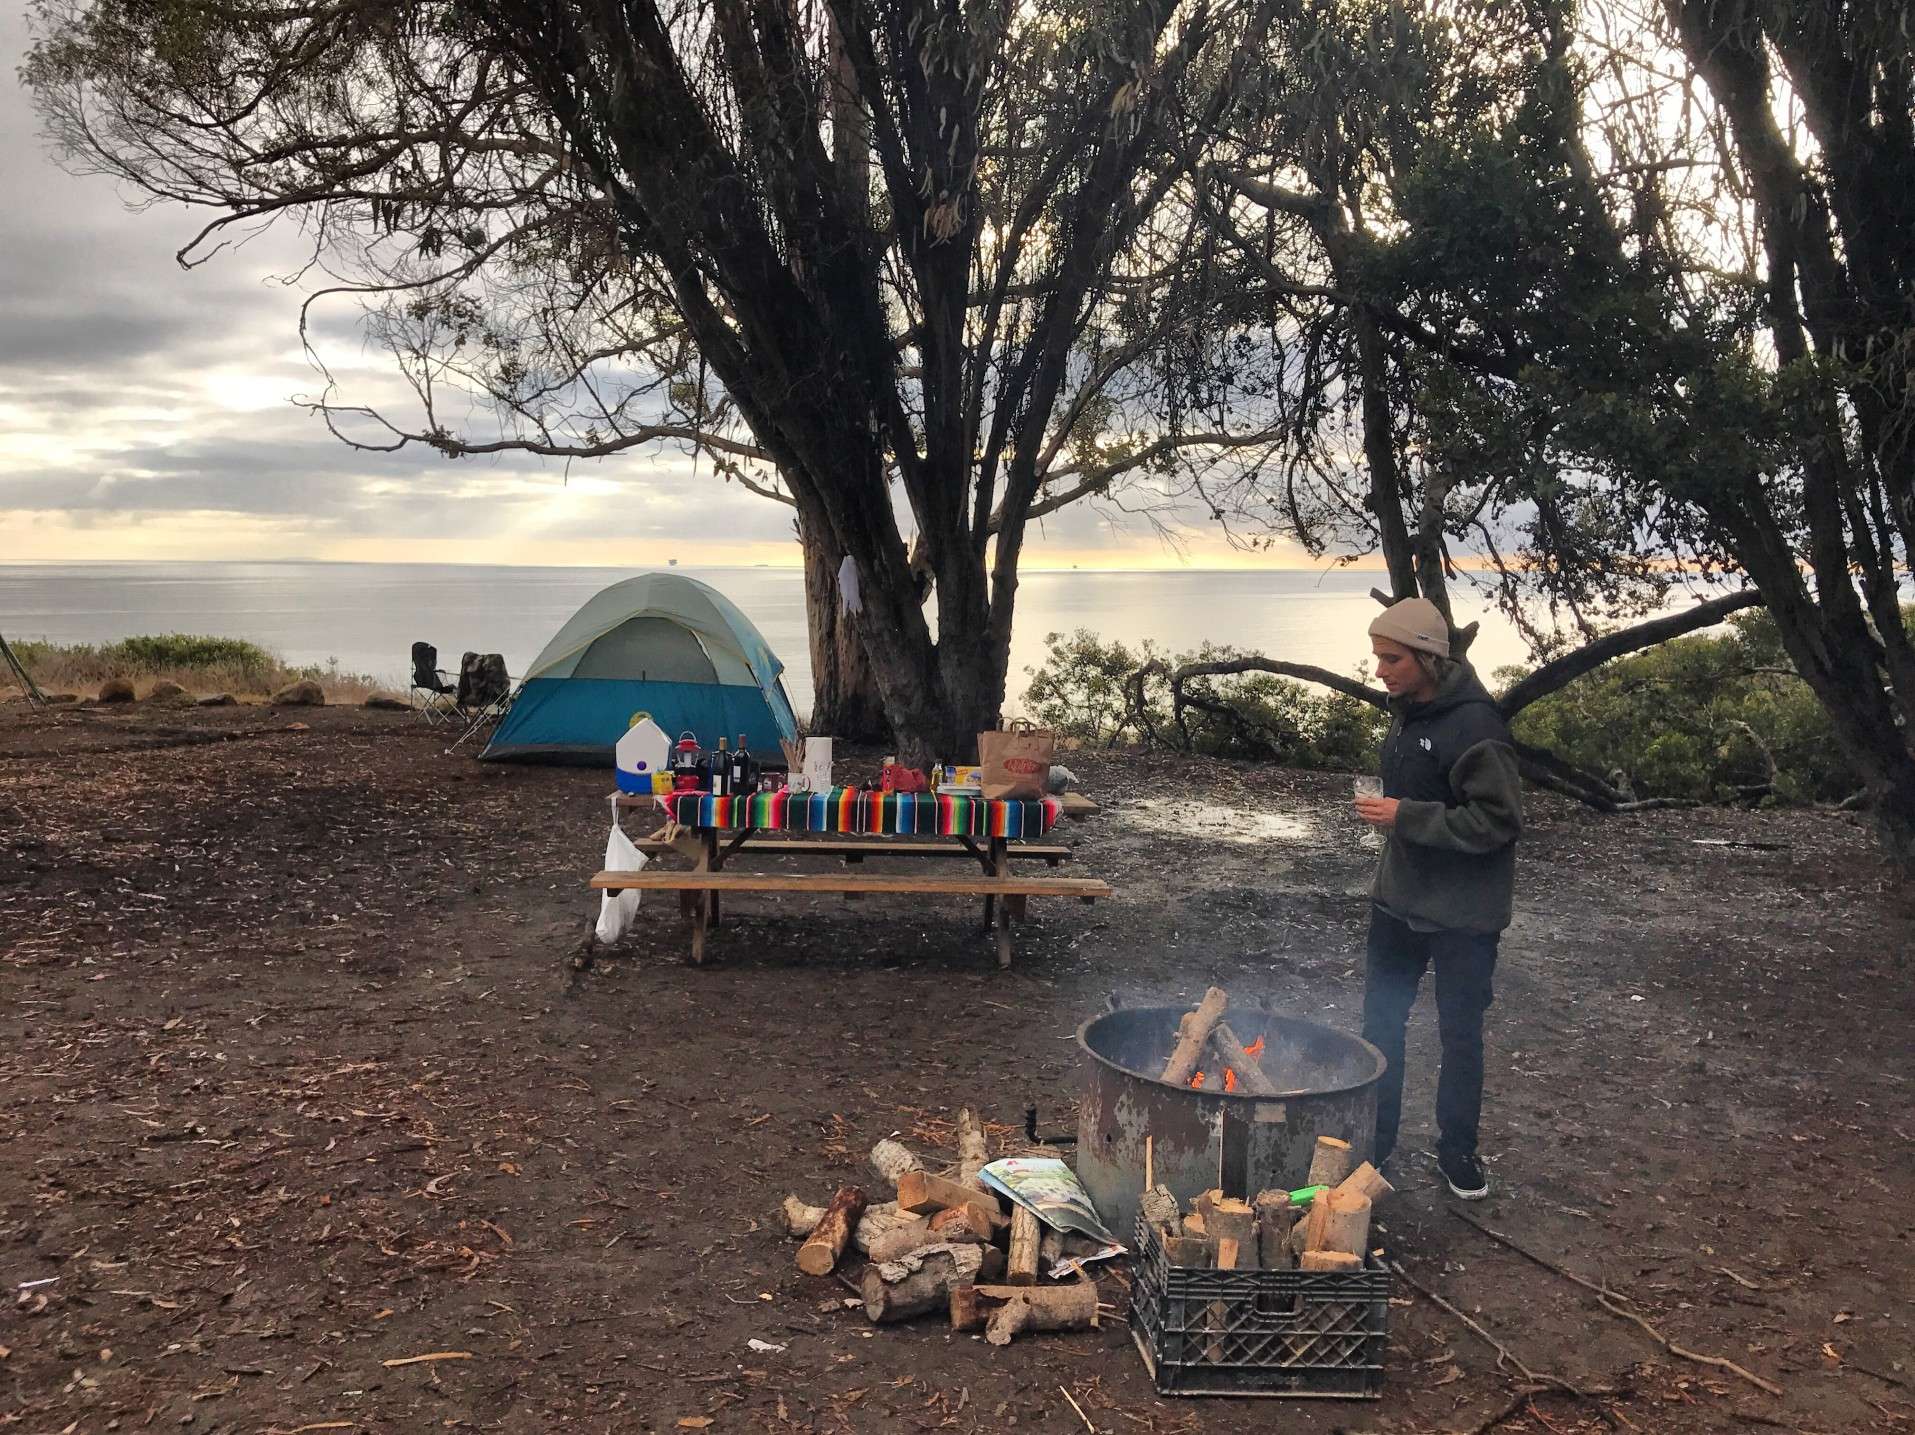 Woman cooking over campfire in California while camping.